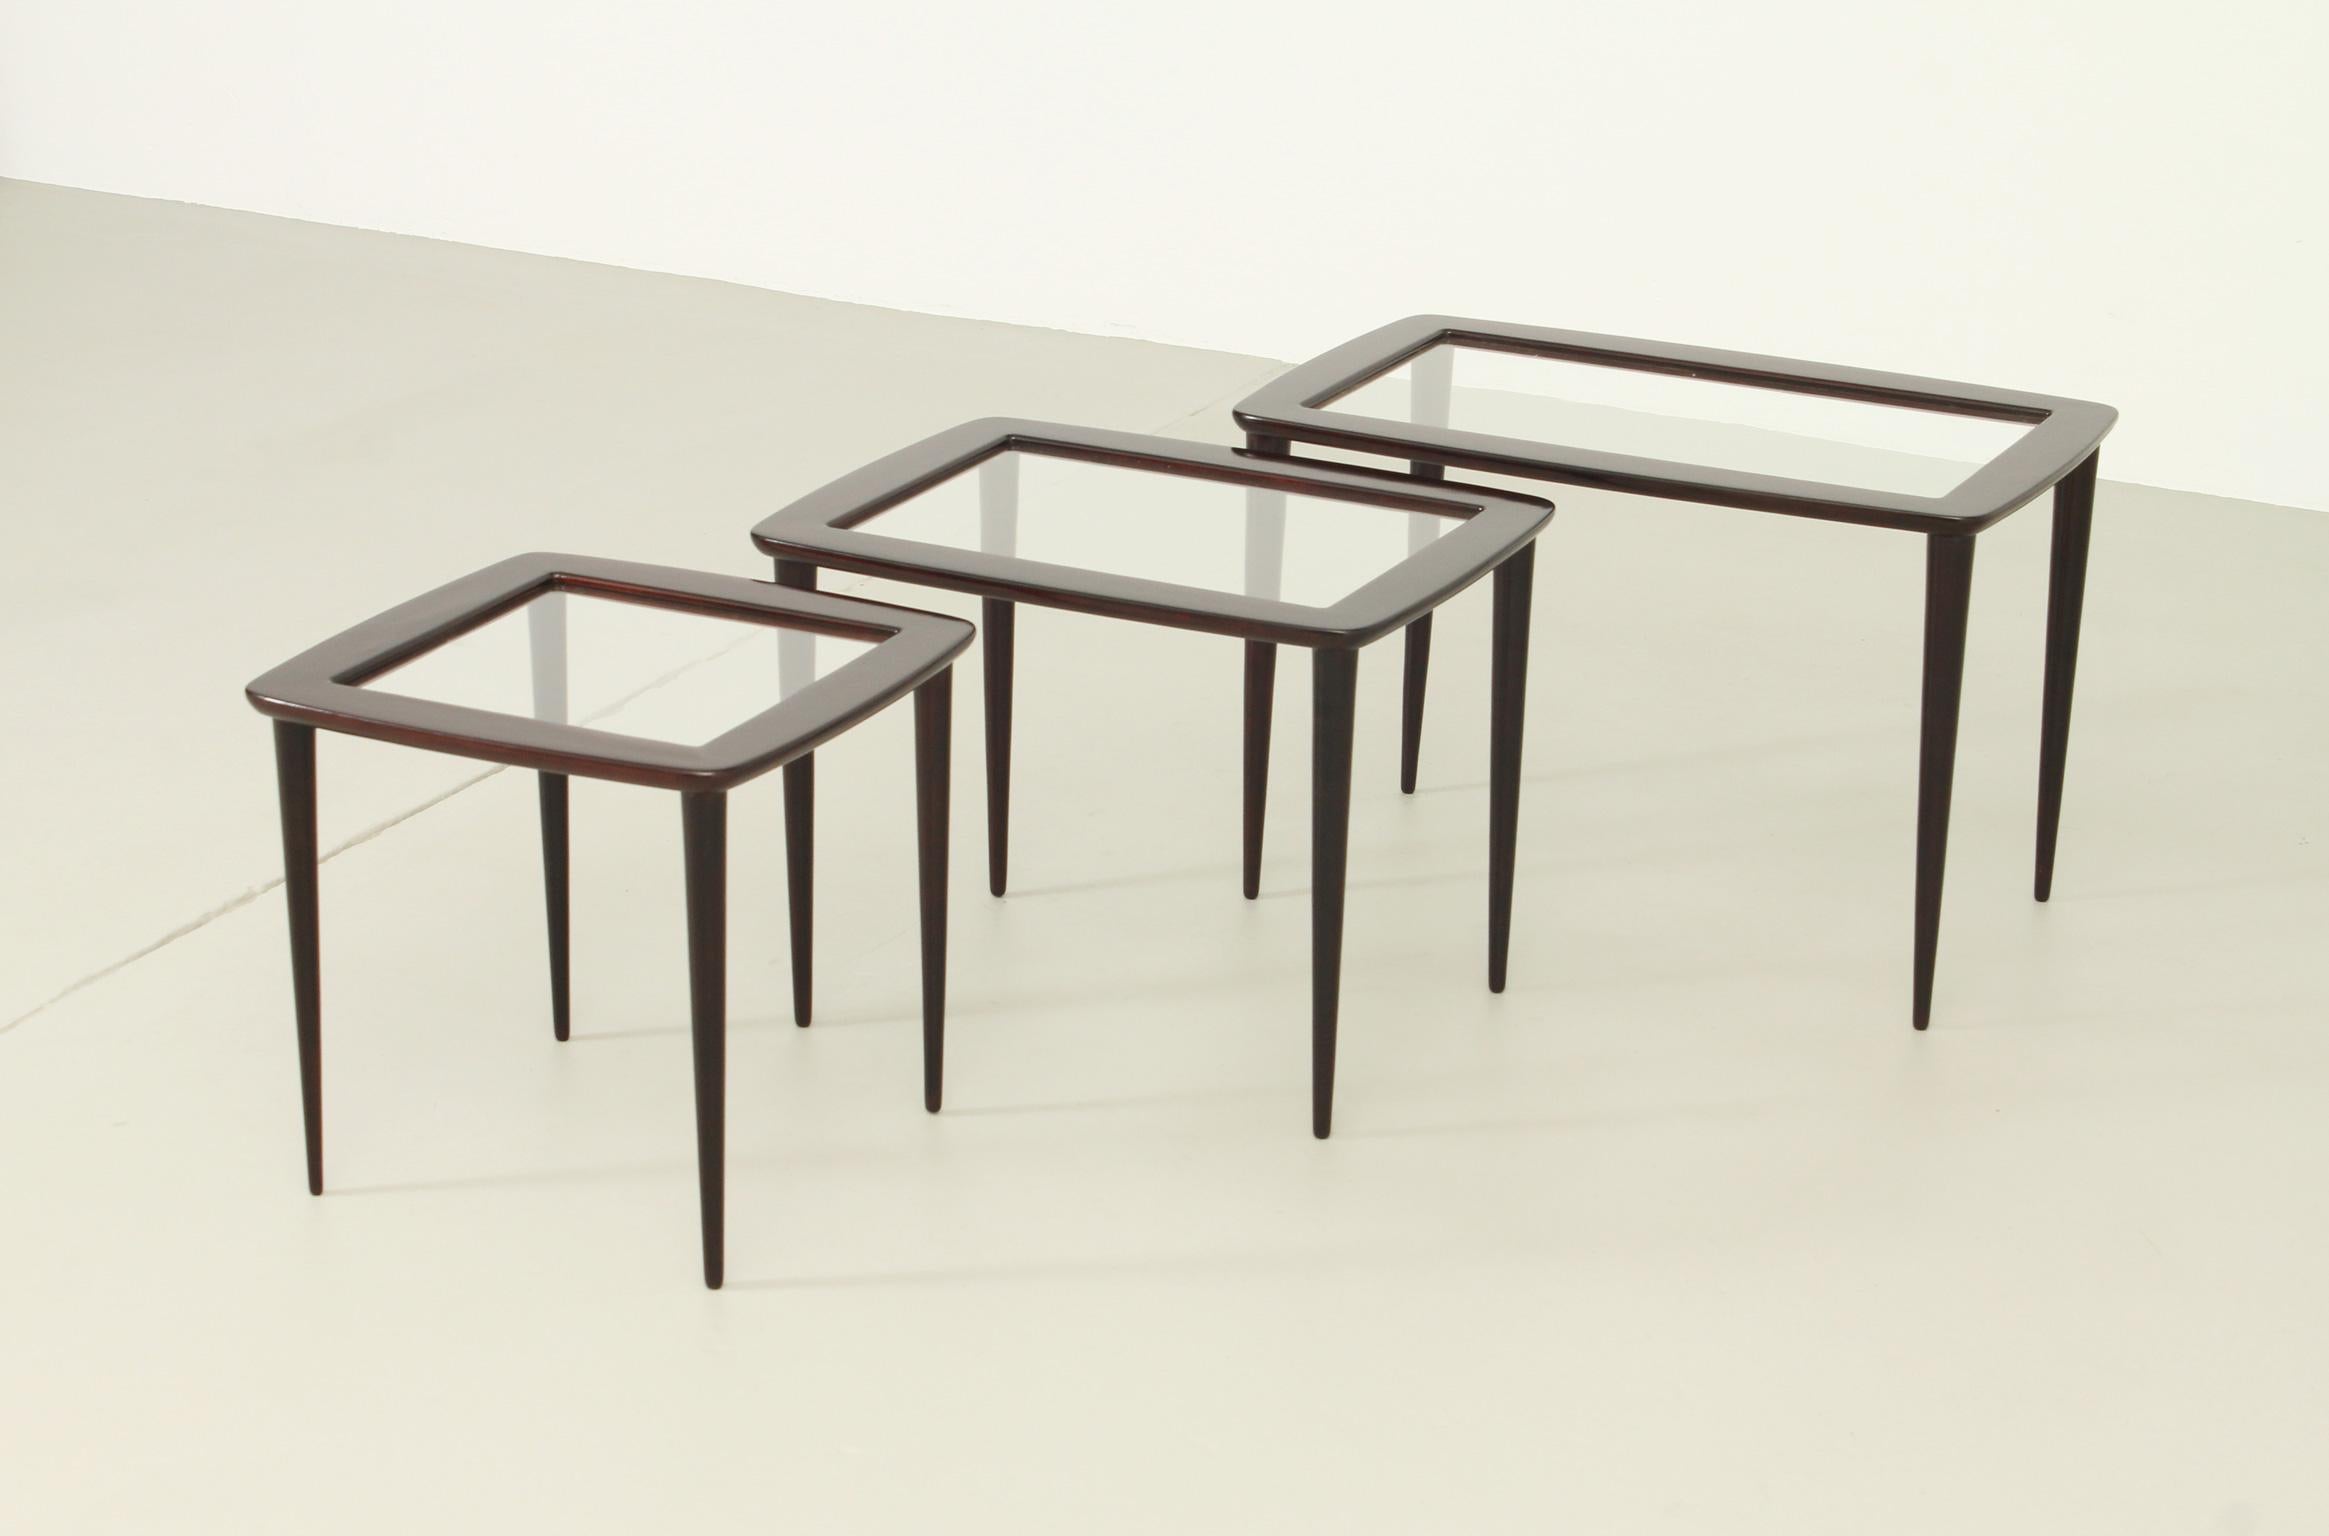 Set of Nesting Tables by Ico Parisi for De Baggis, 1955 For Sale 3